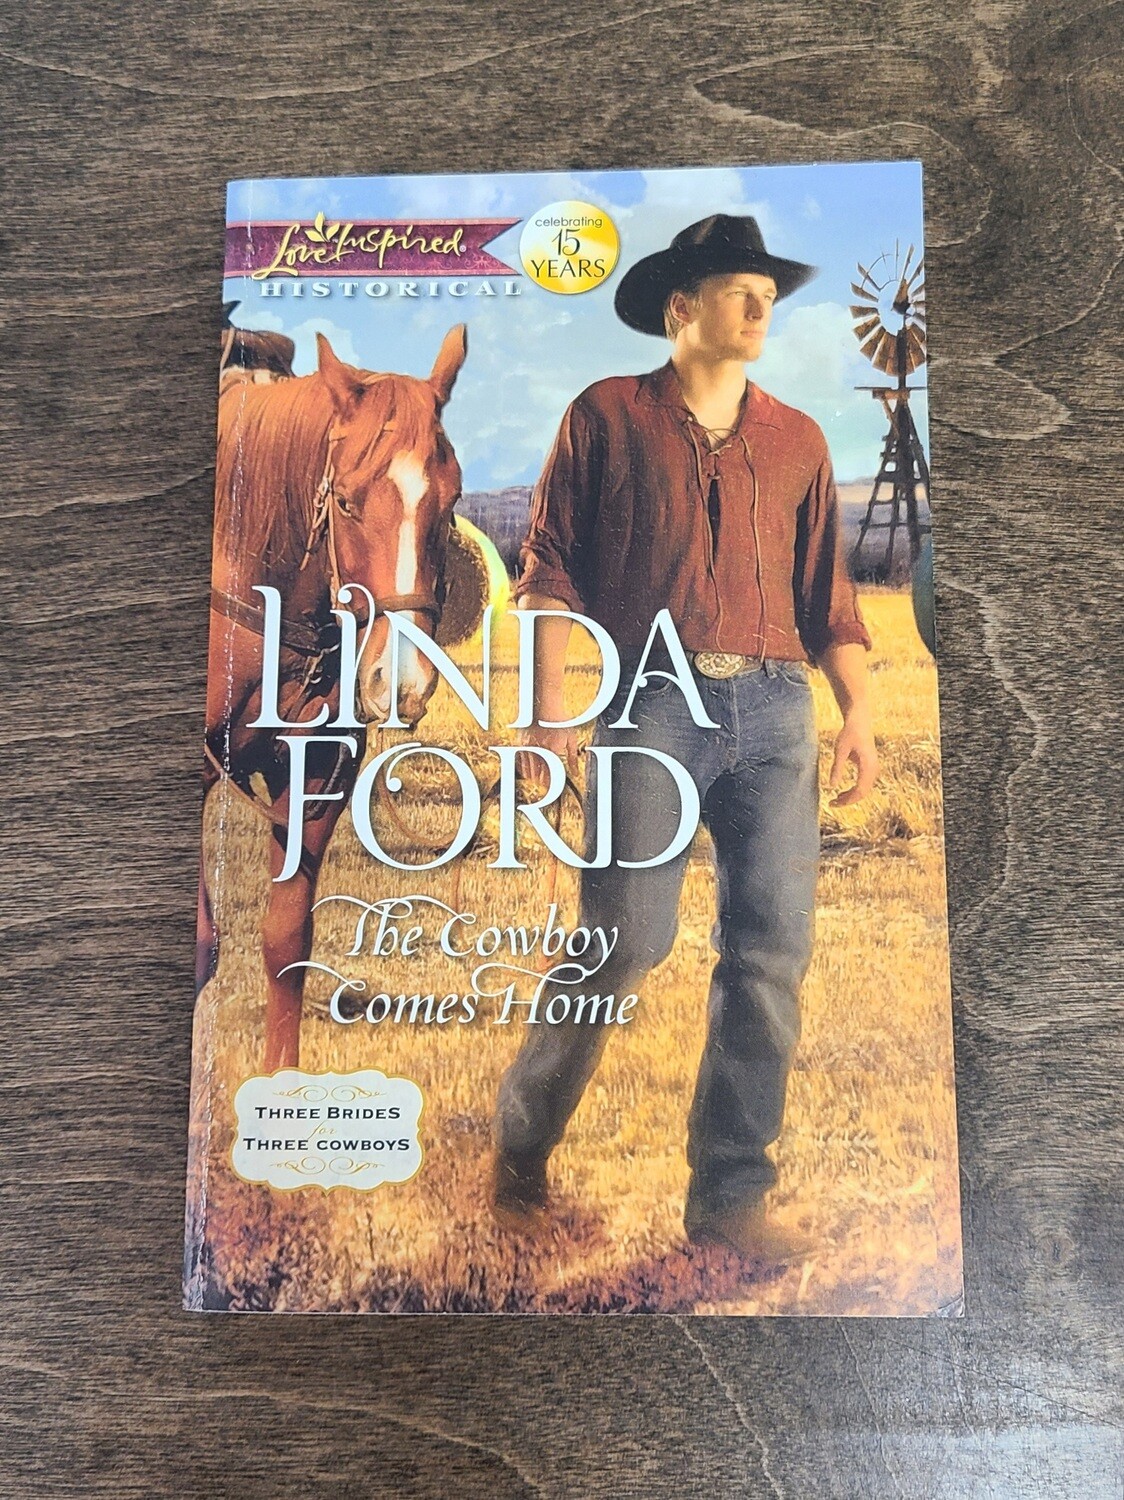 The Cowboy Comes Home by Linda Ford